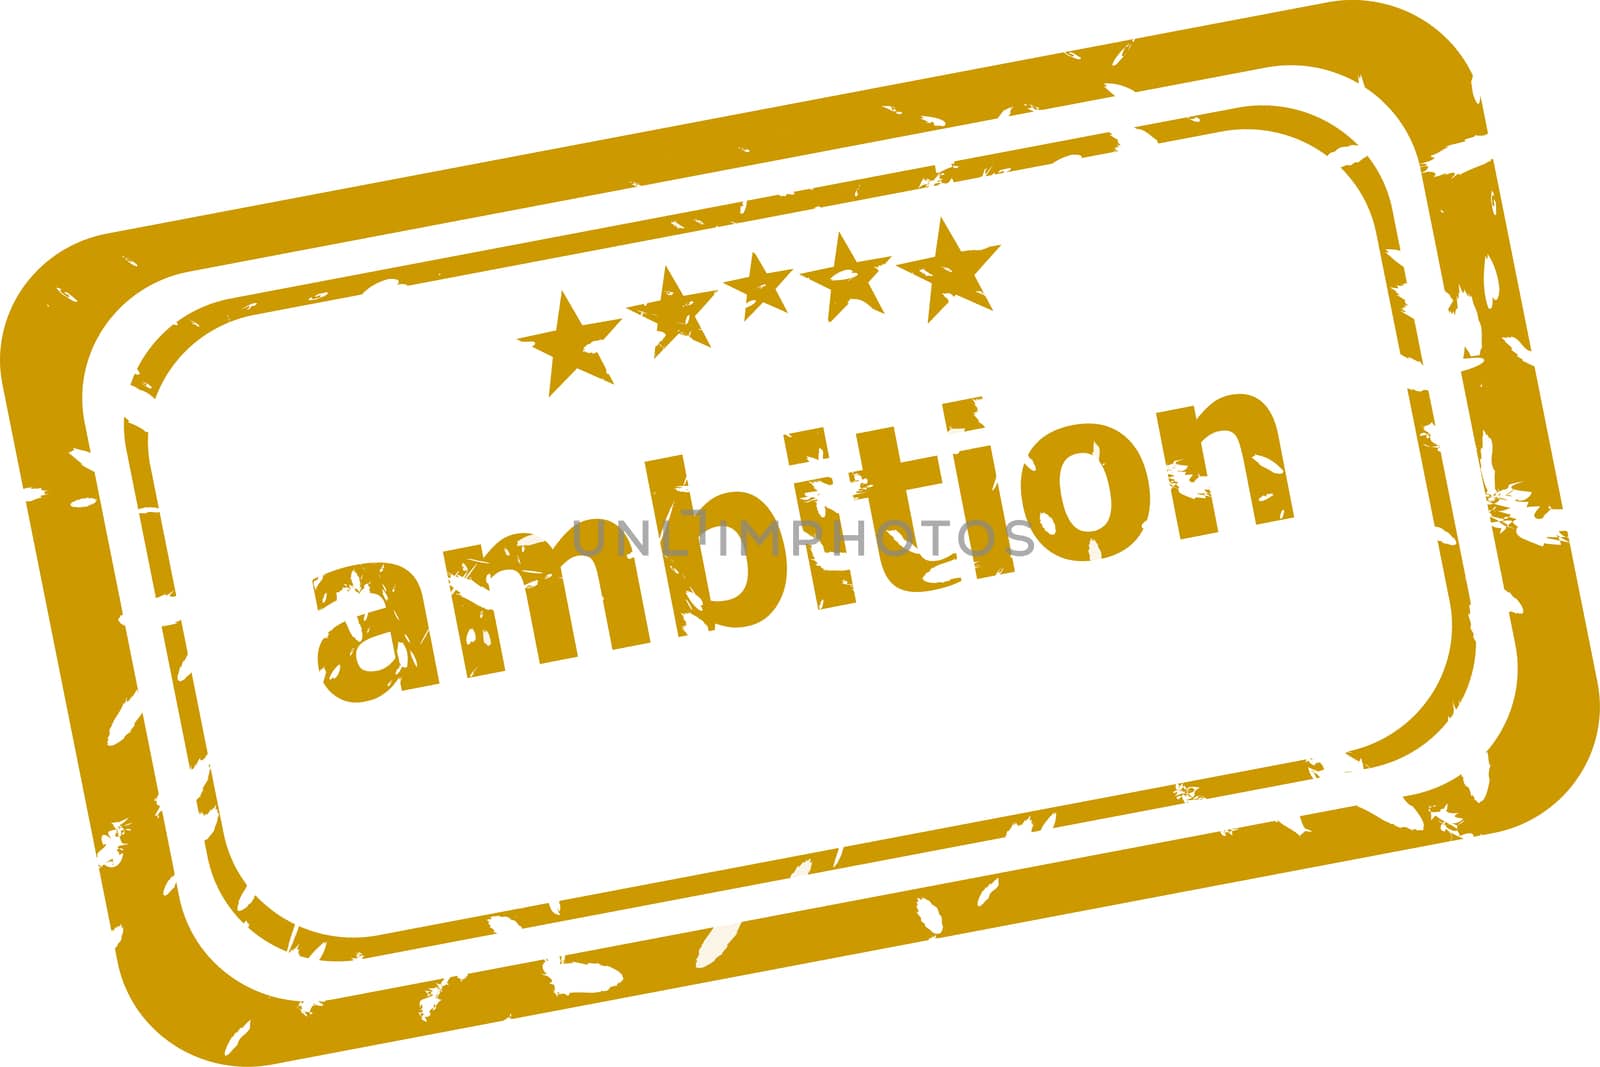 ambition stamp isolated on white background